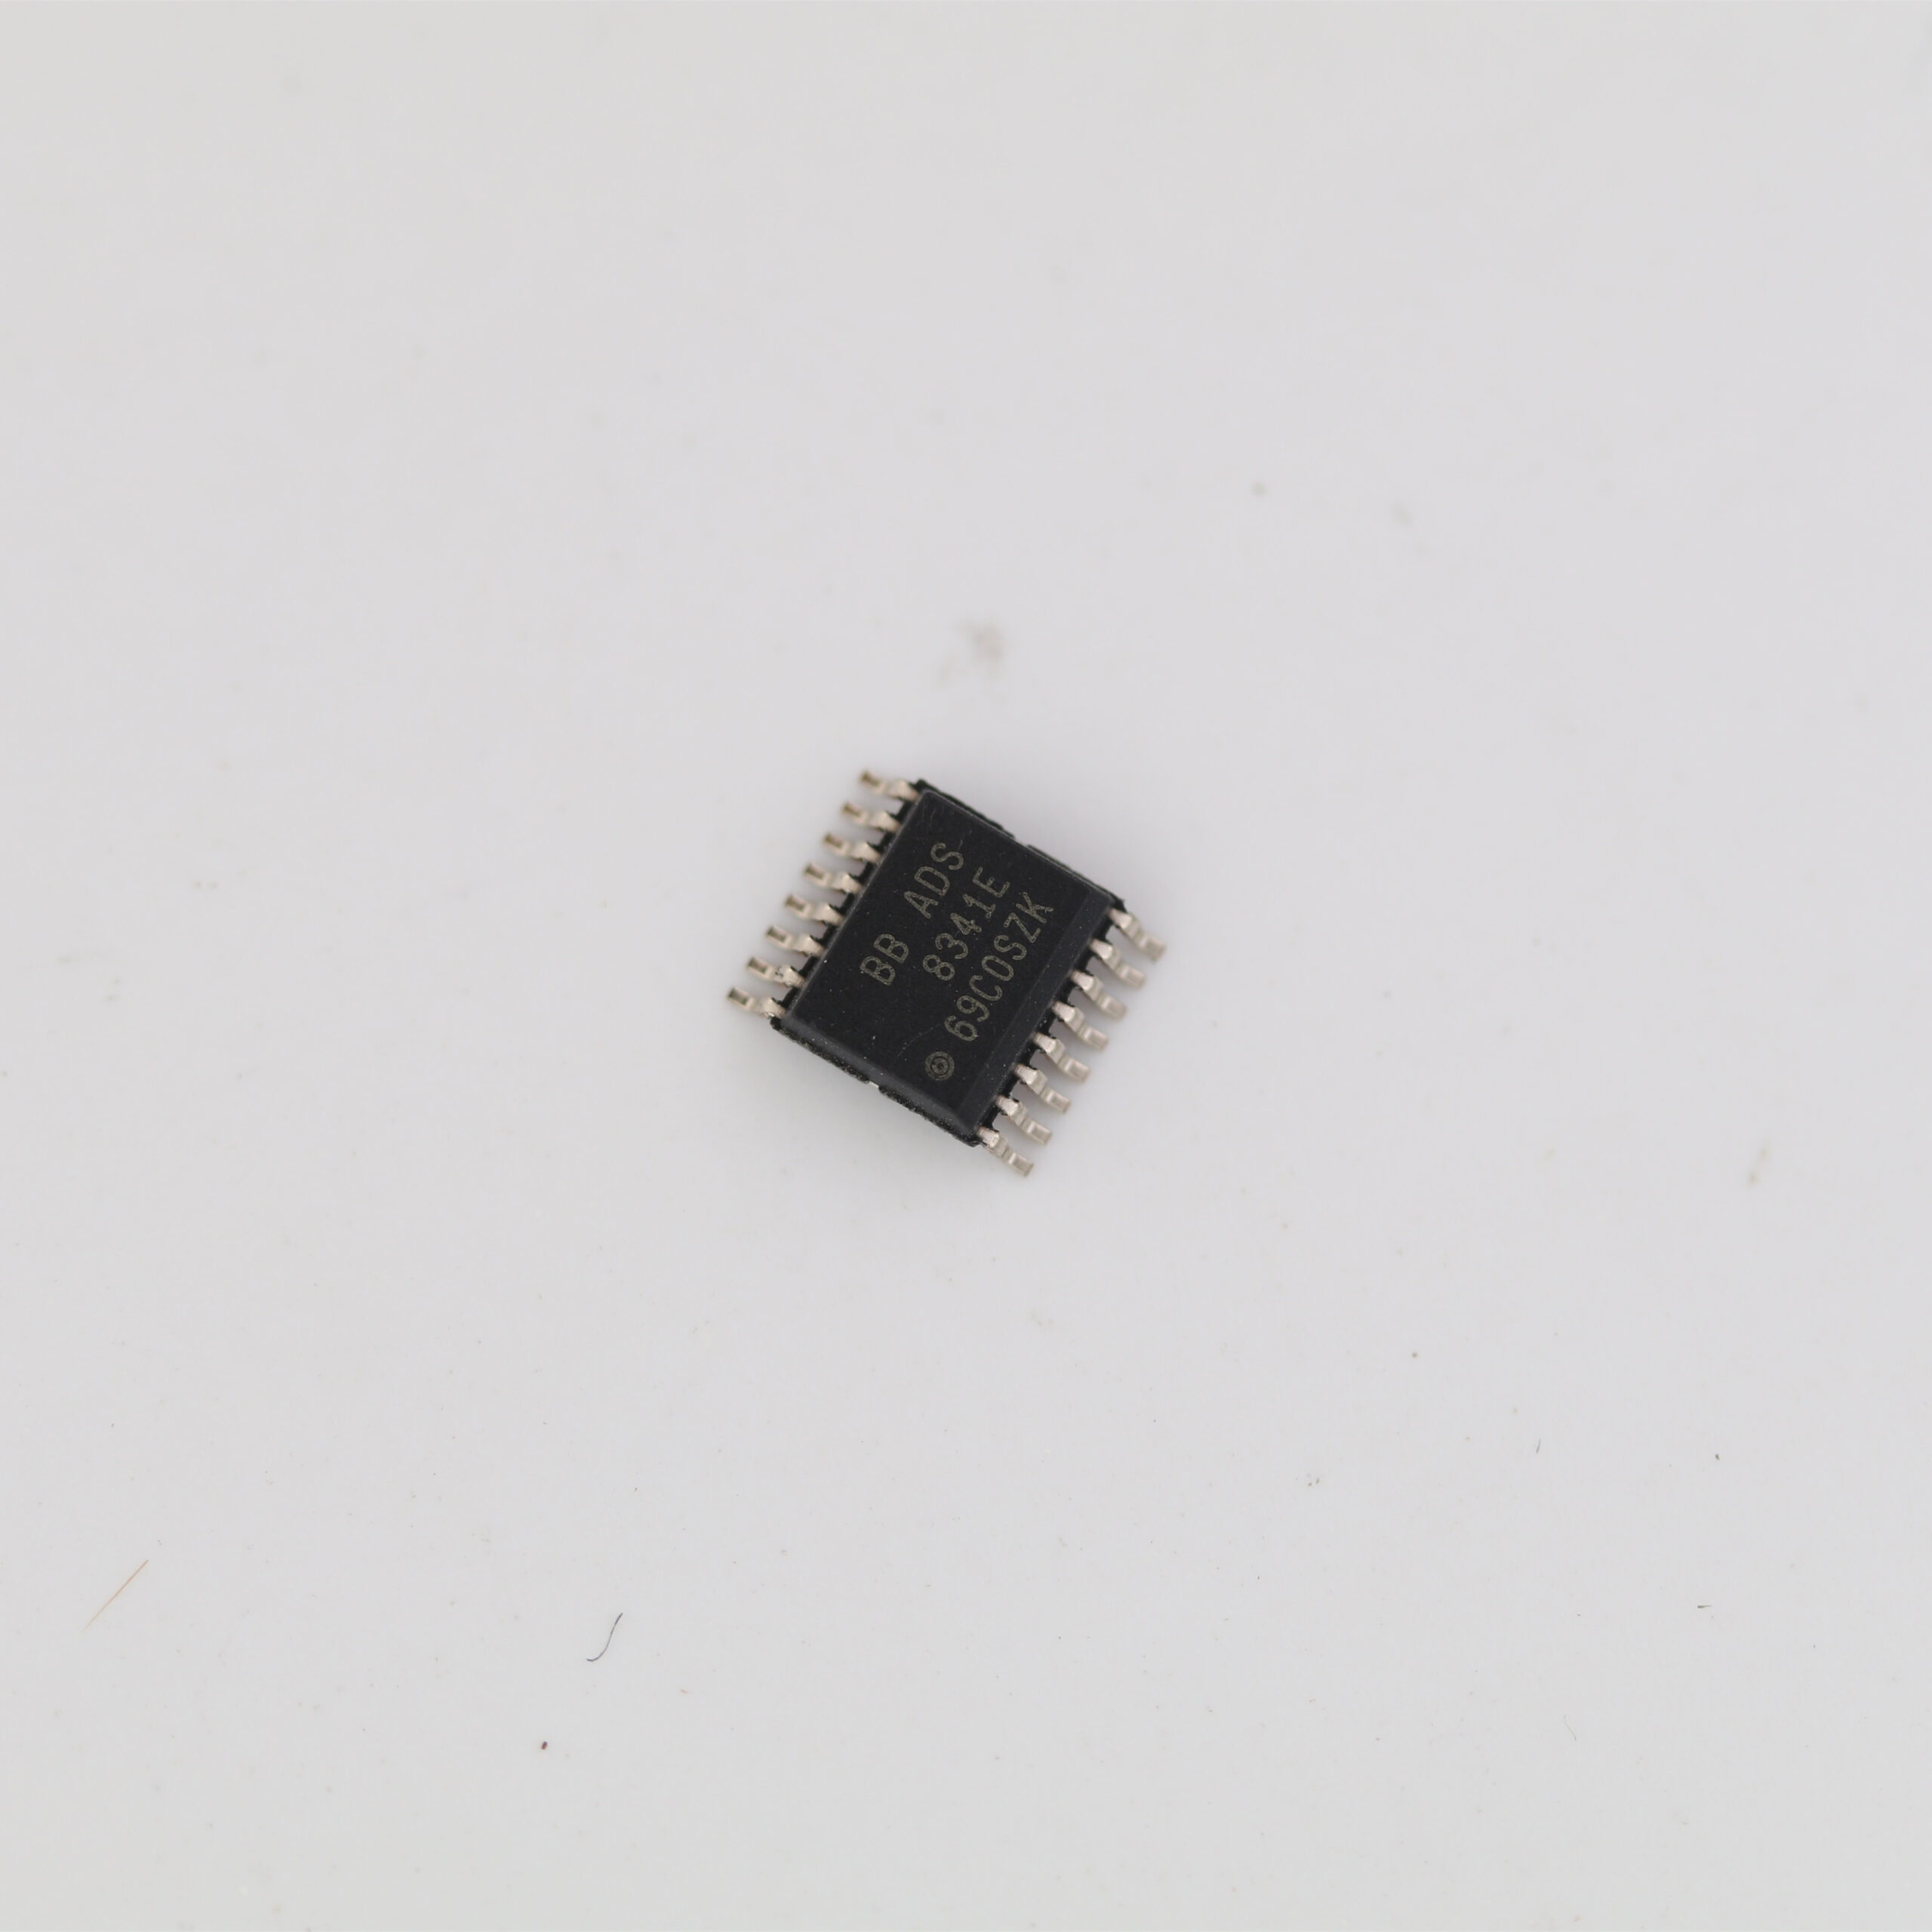 New and original Integrated circuit ADS8341E